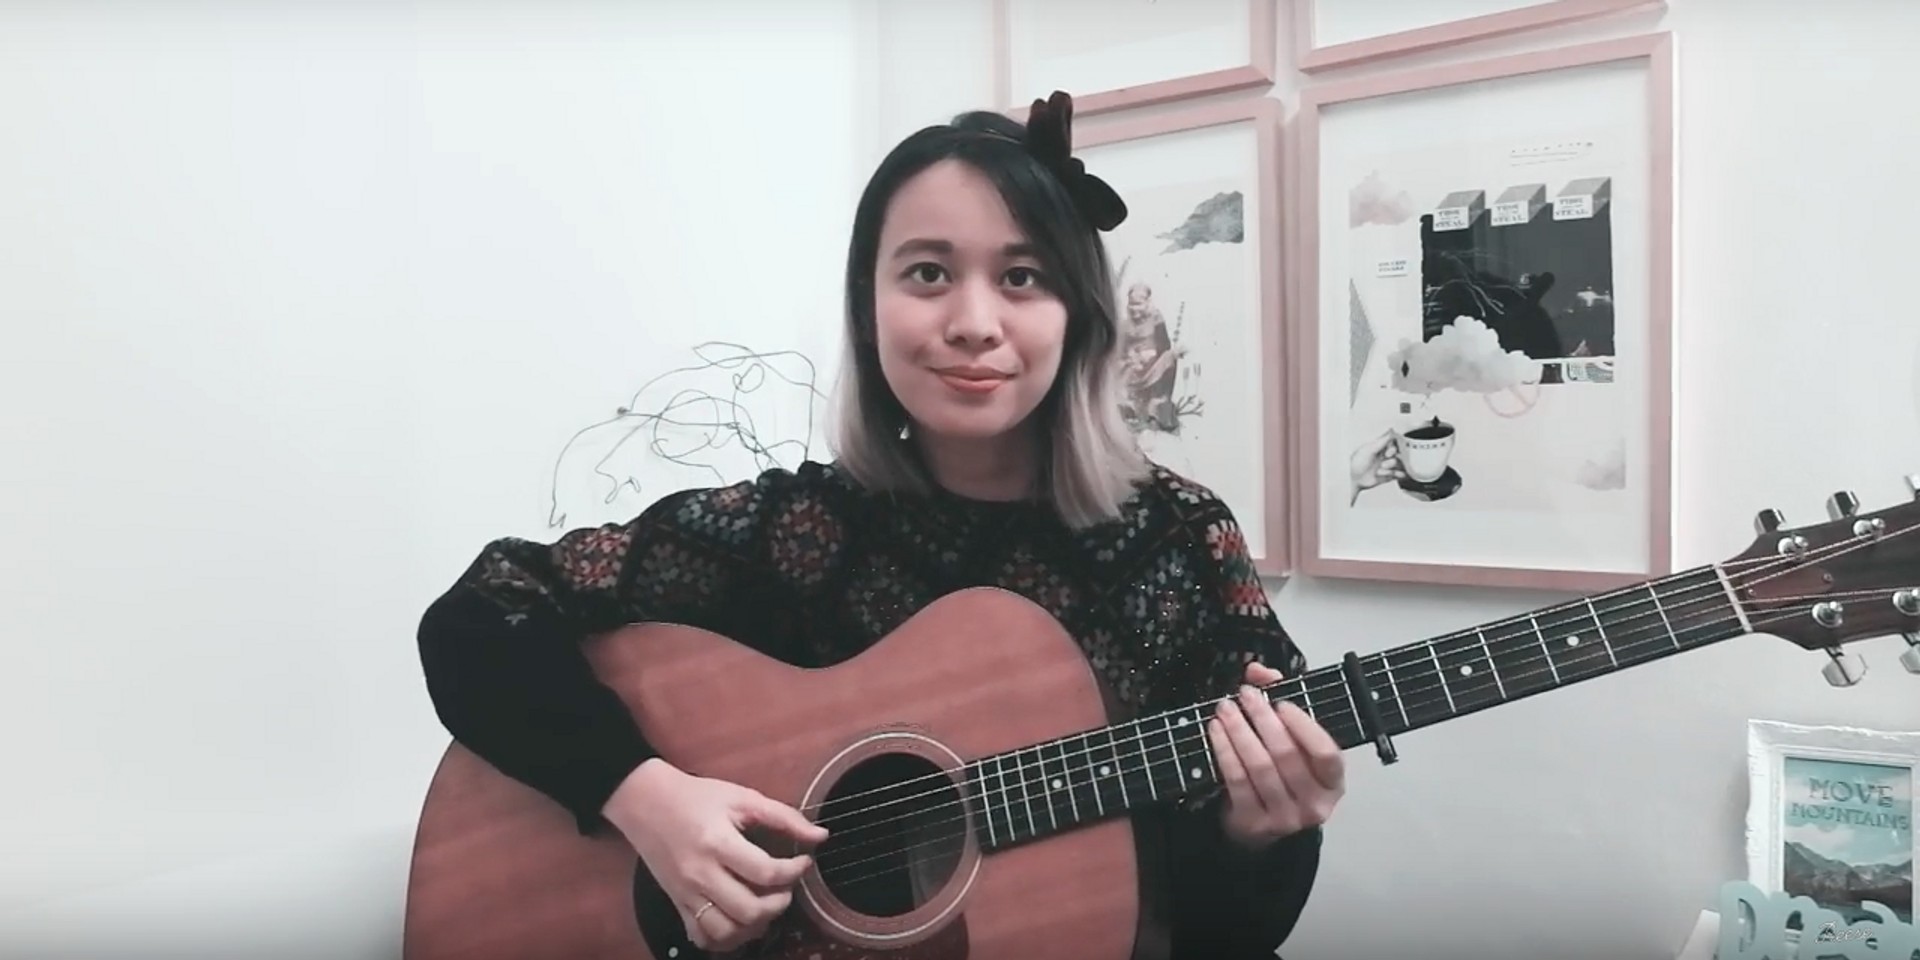 WATCH: Reese Lansangan brings on Christmas cheer with 'No Snow'